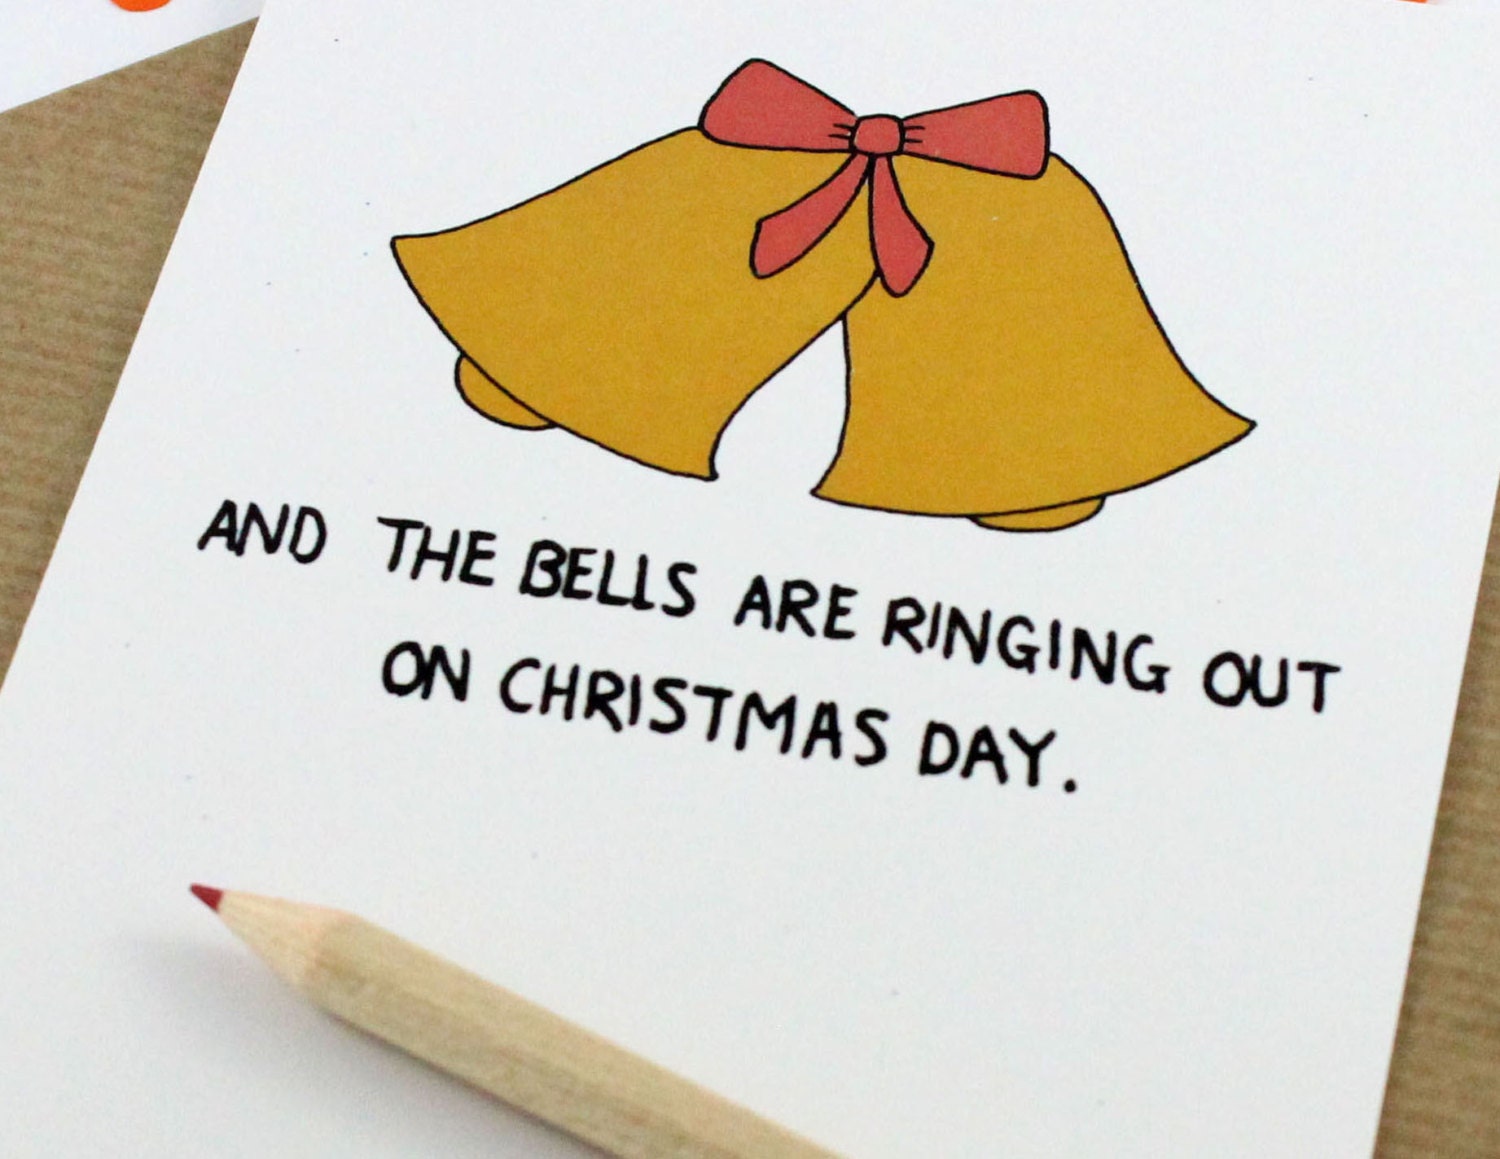 Christmas Card And The Bells Are Ringing Out by PostLoveDesigns